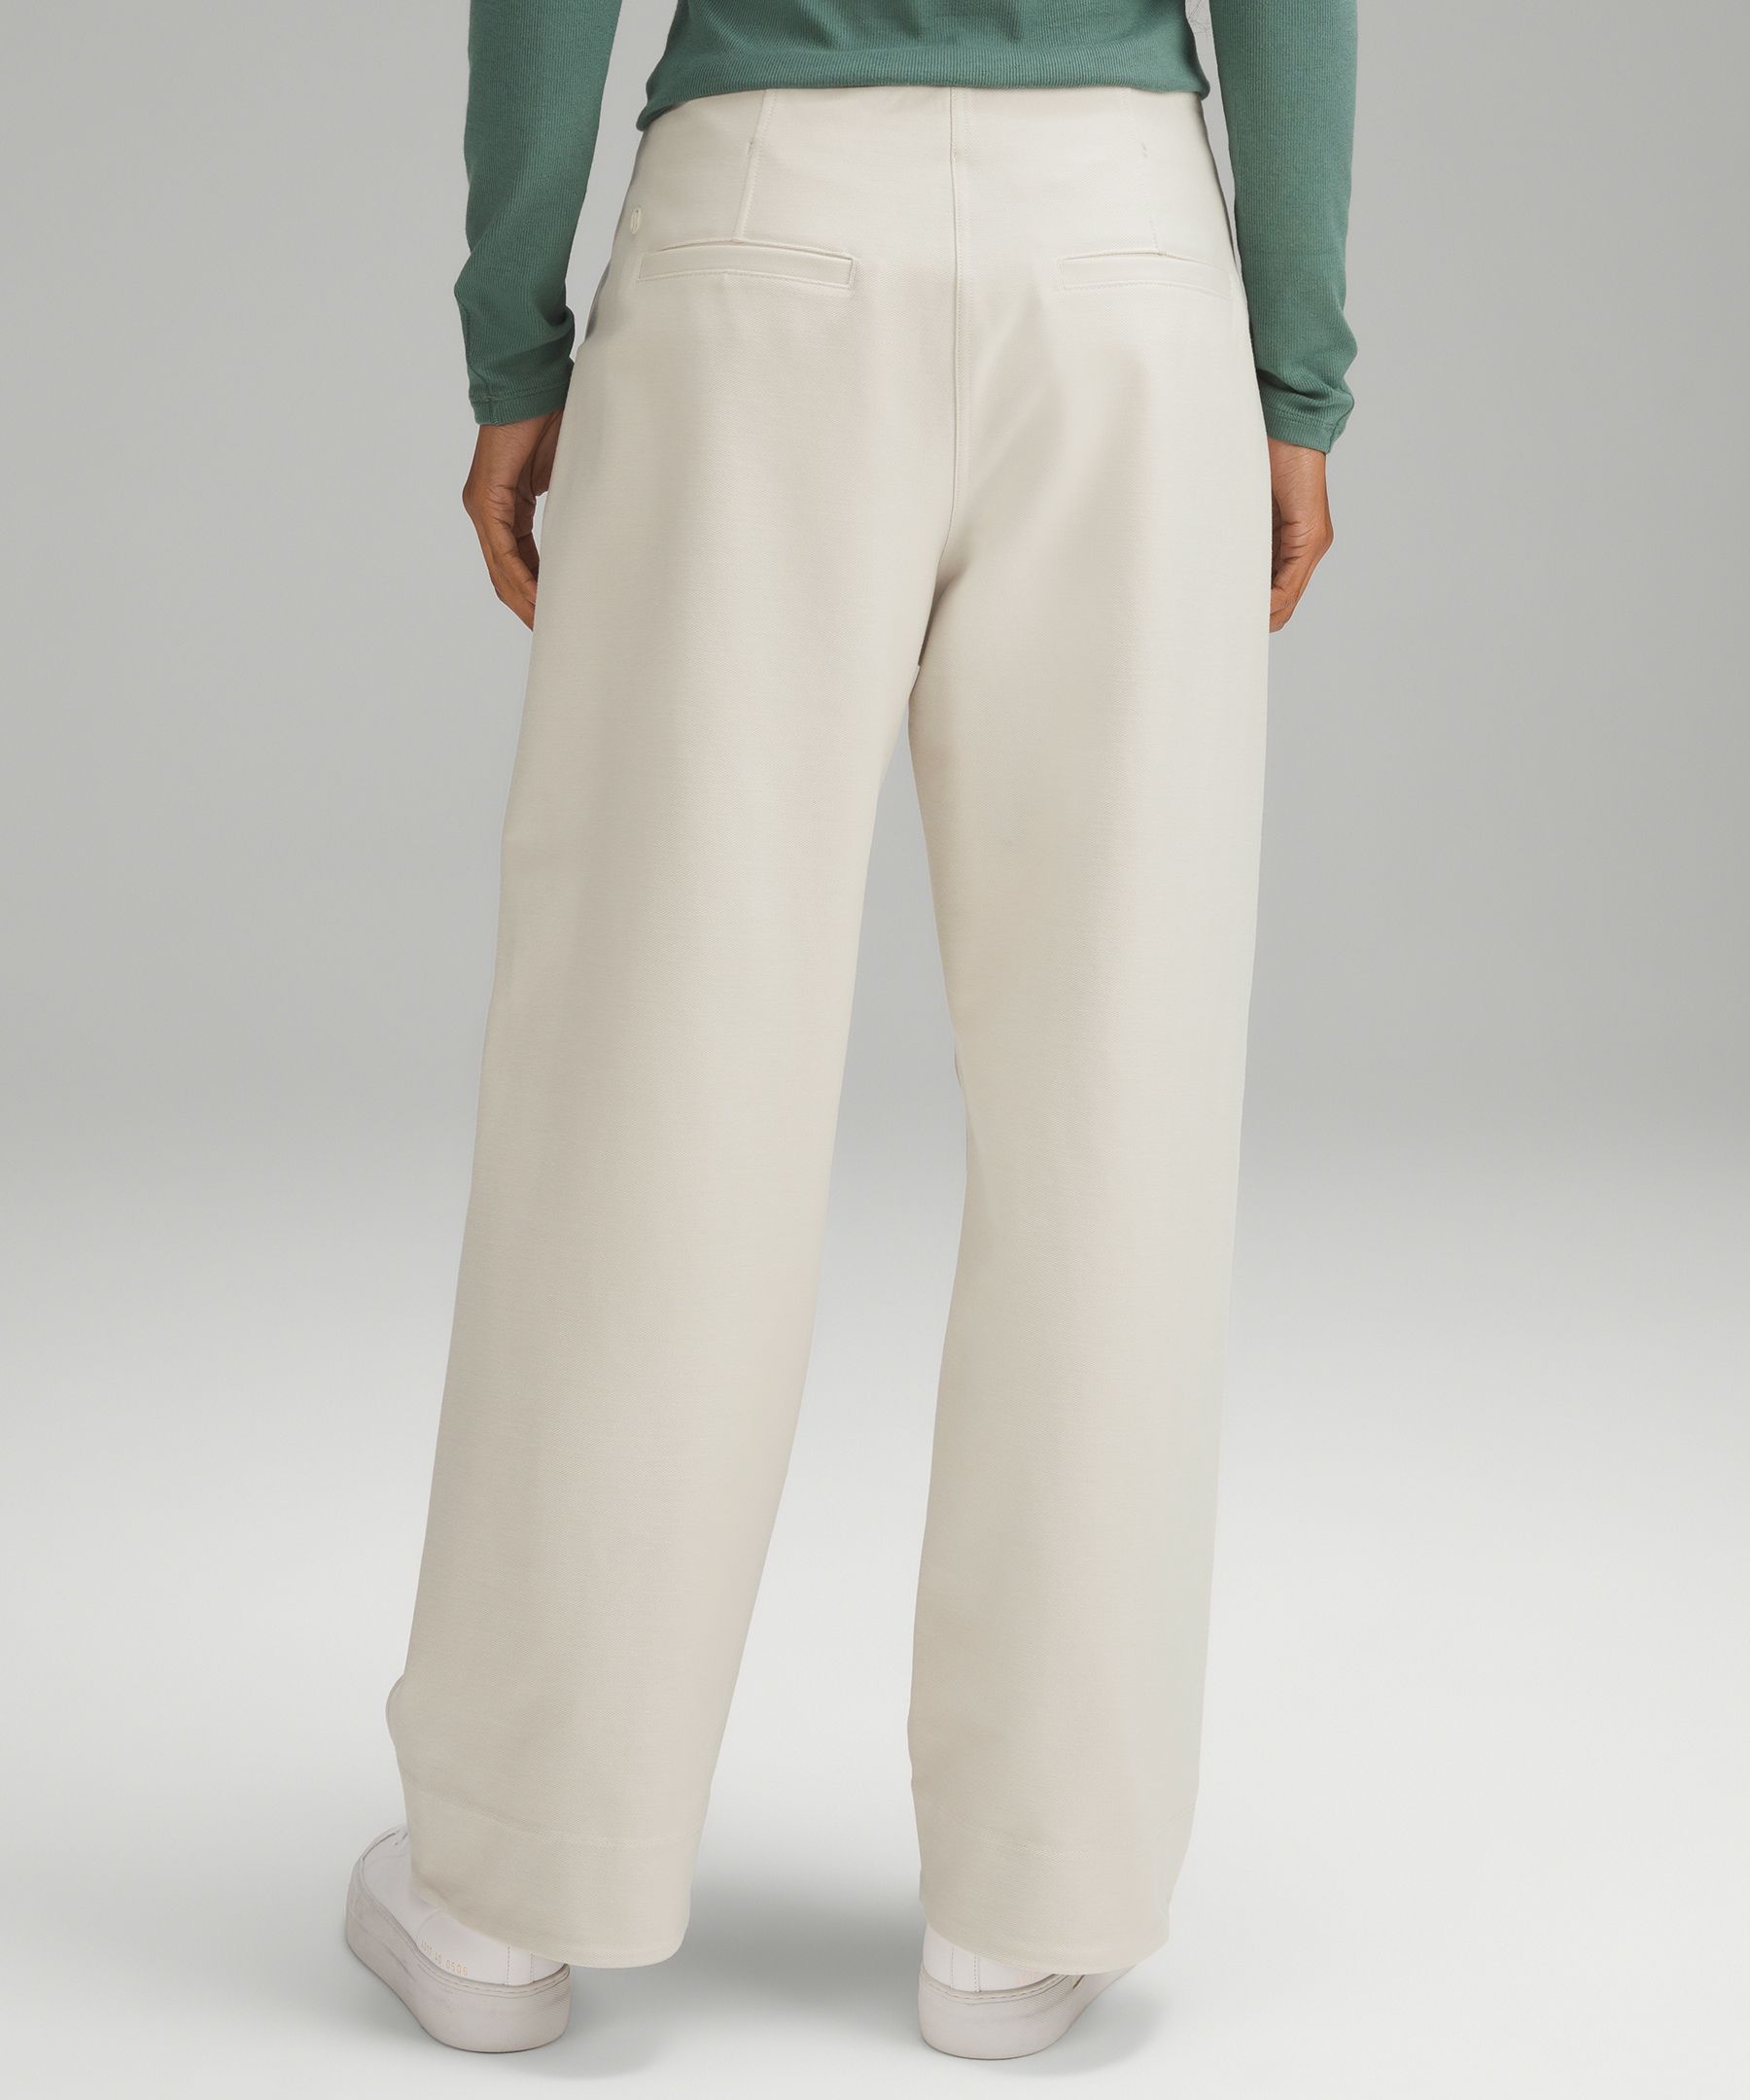 Utilitech Relaxed Mid-Rise Trouser 7/8 Length | Women's Trousers 